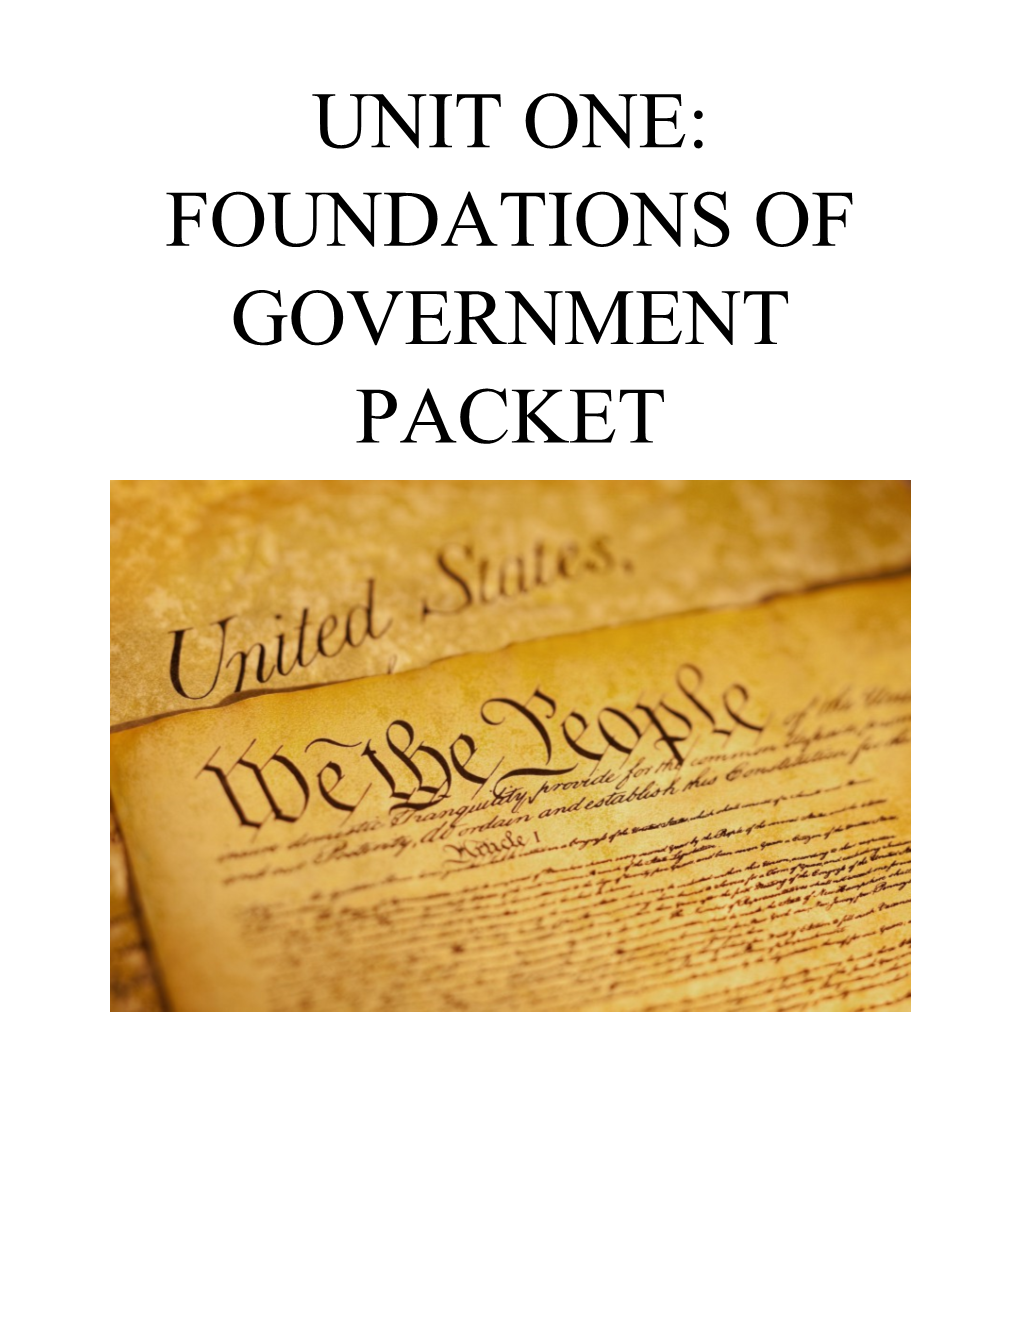 Unit One: Foundations of Governmentpacket